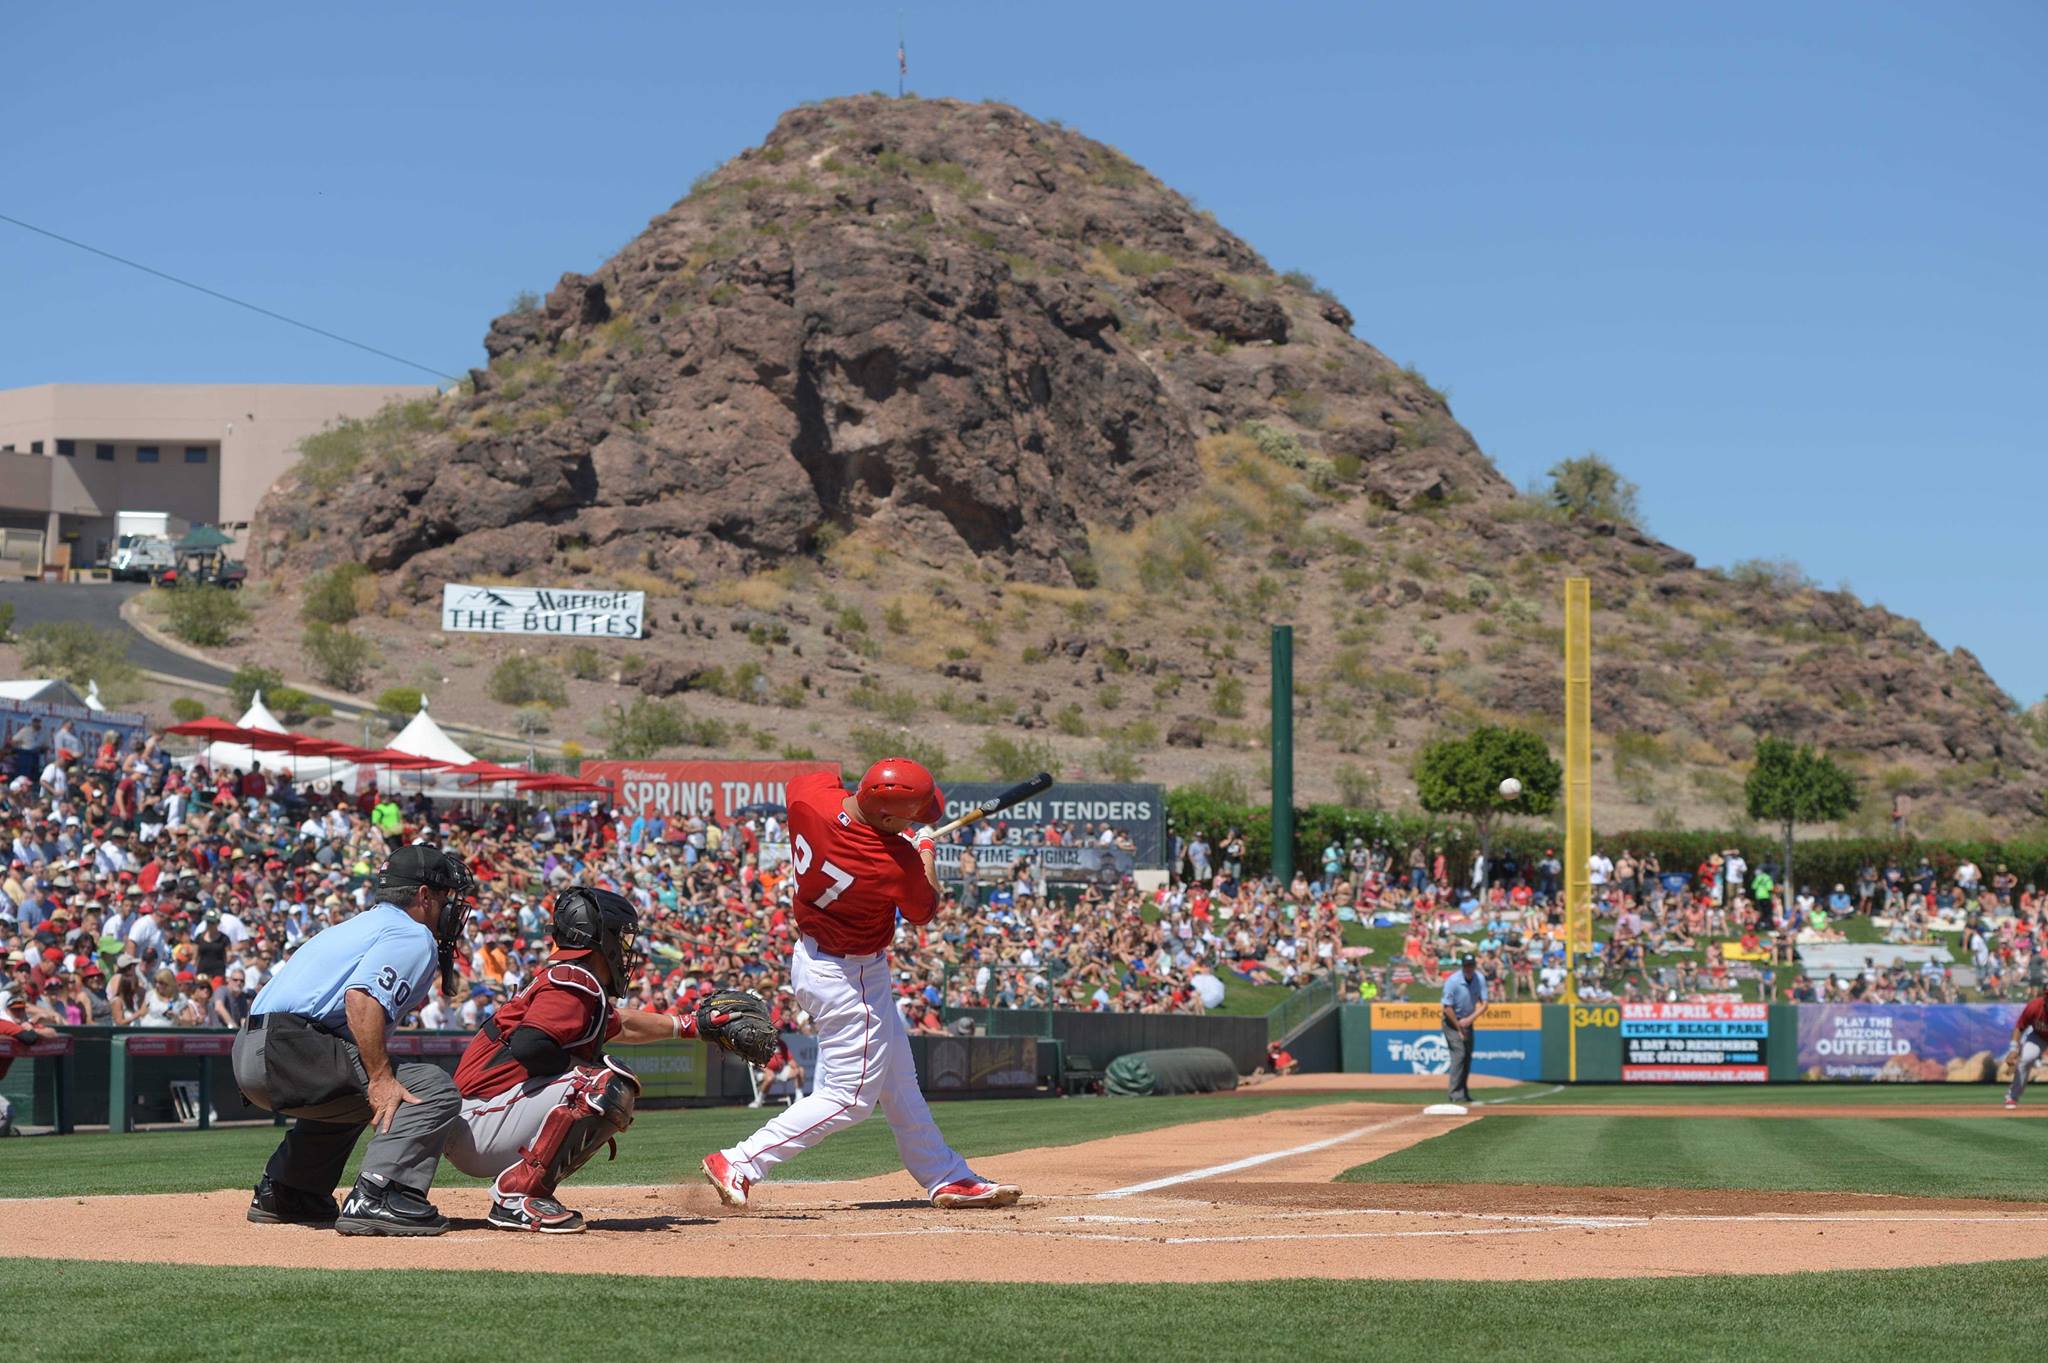 Spring Training in Arizona Cactus League Schedules, Hotels and Tips